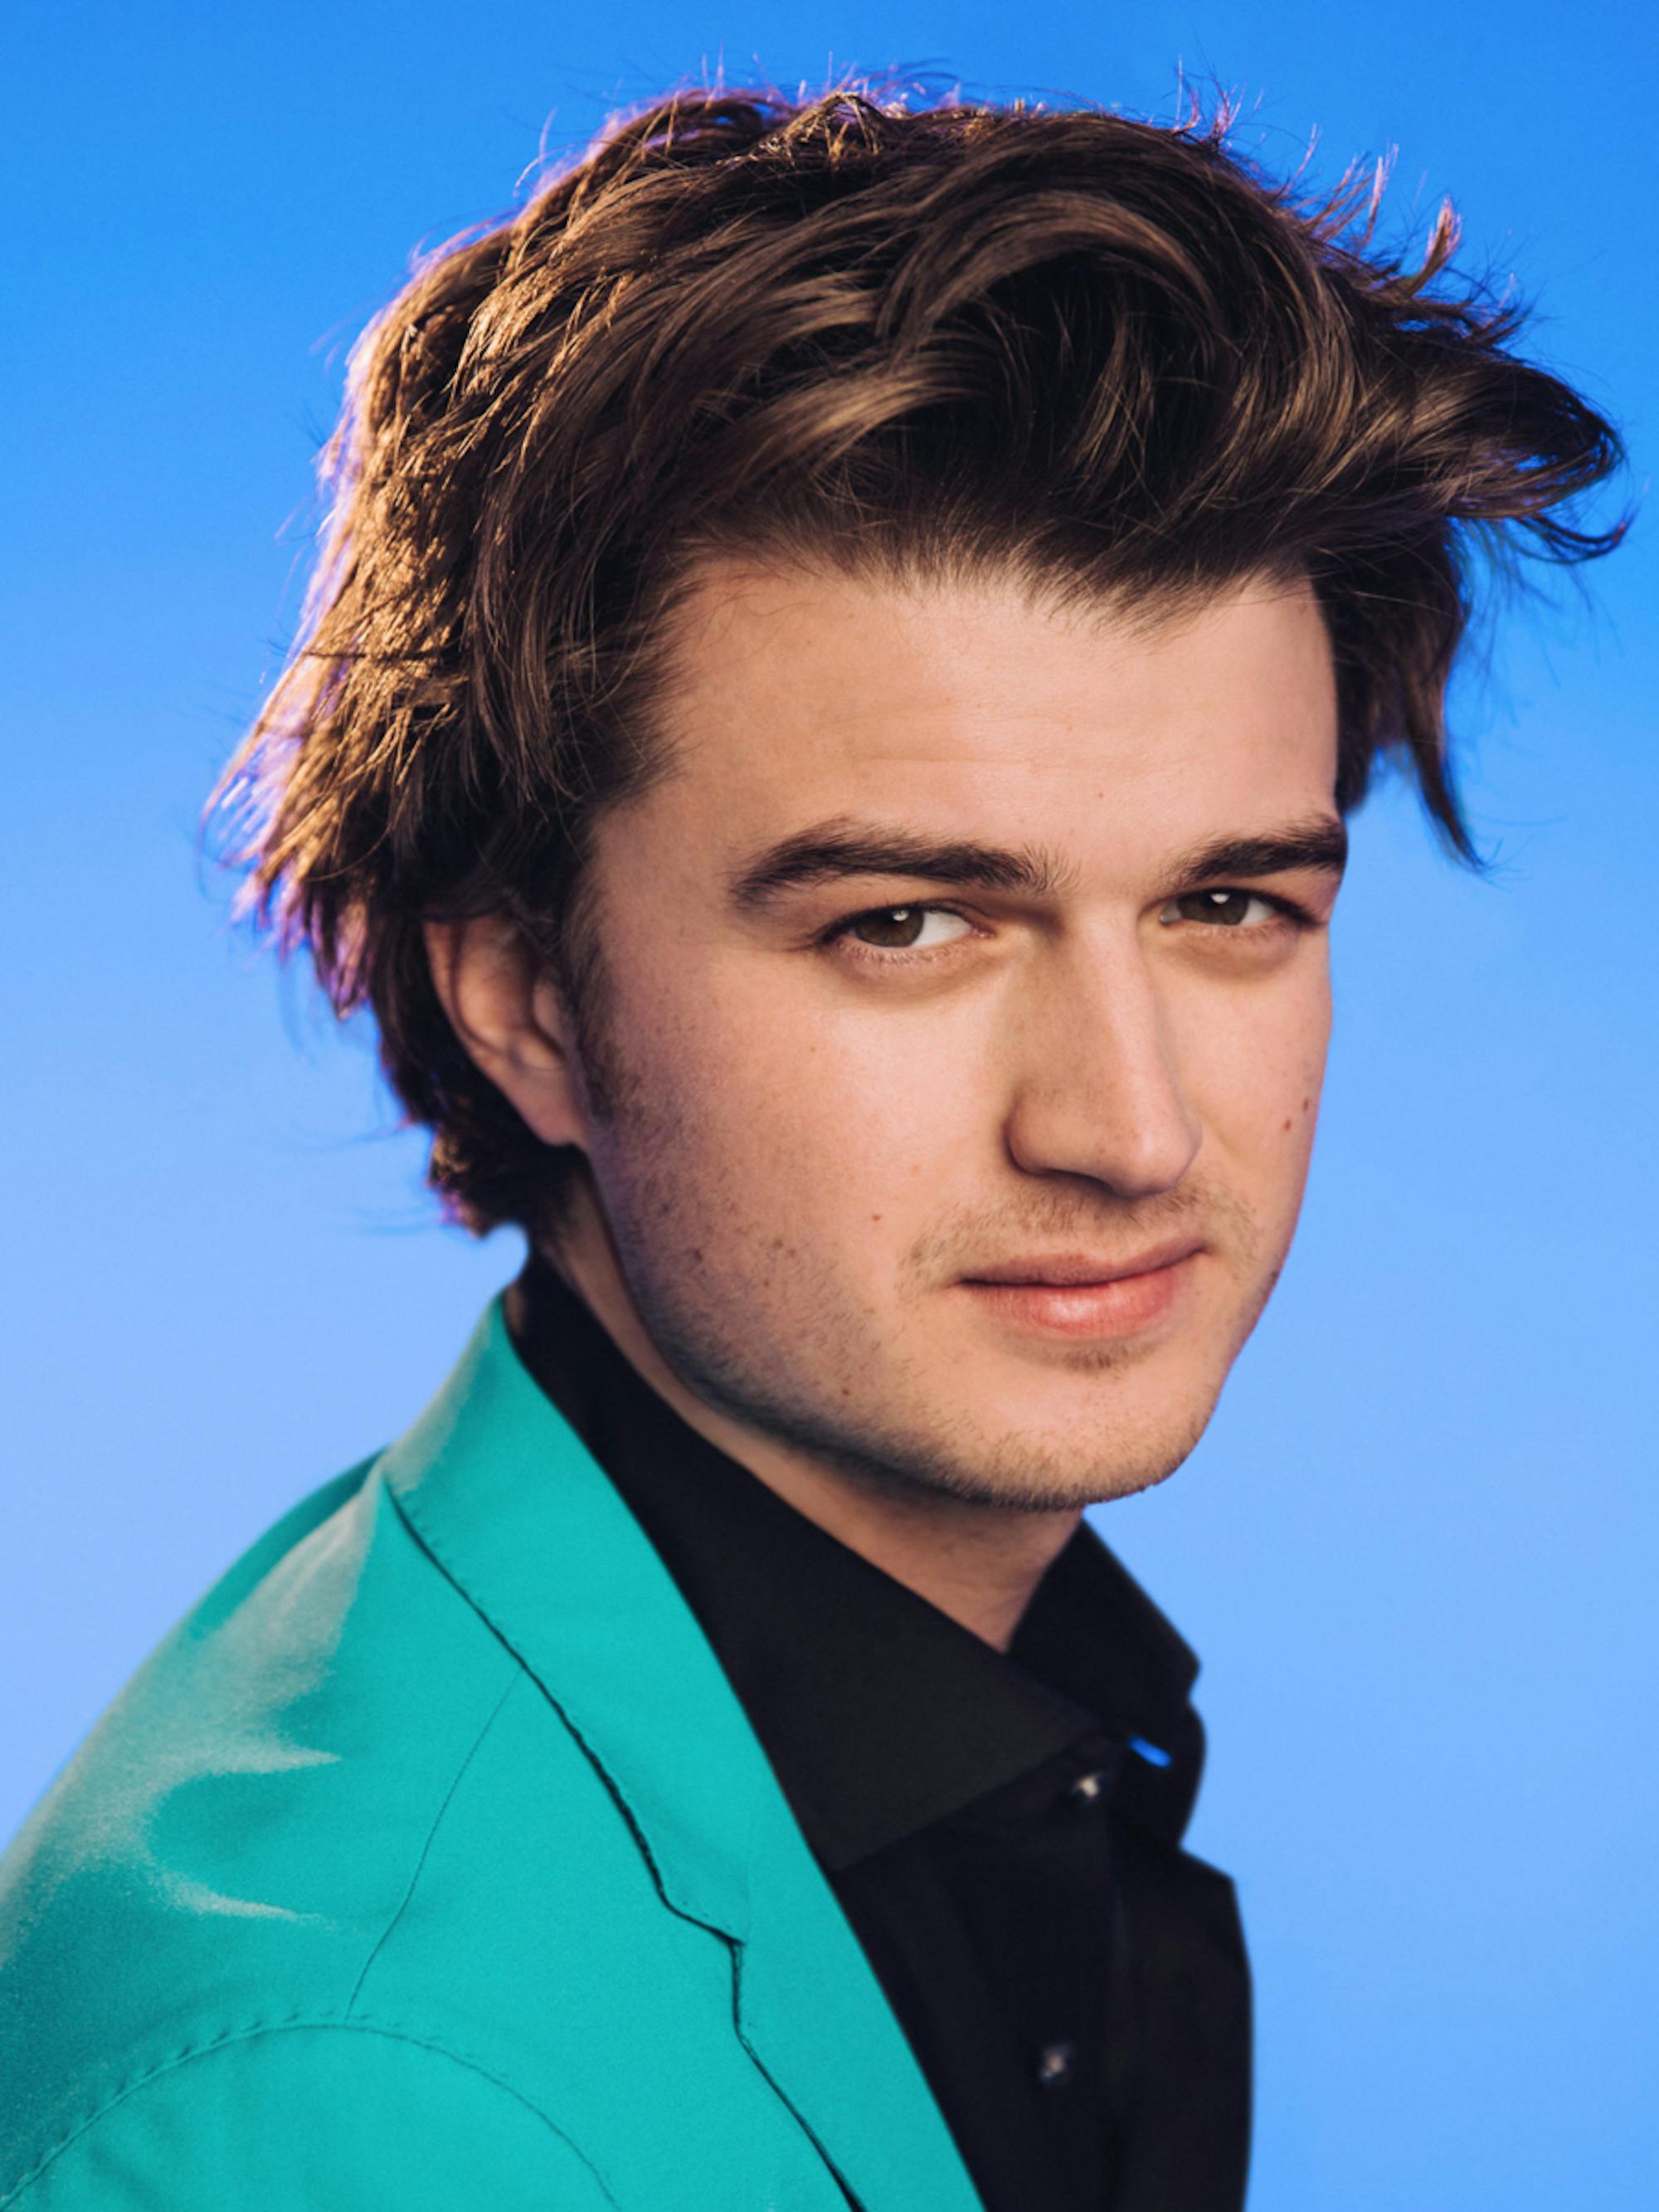 A close-up of Joe Keery of Stranger Things in front of a sky blue background.